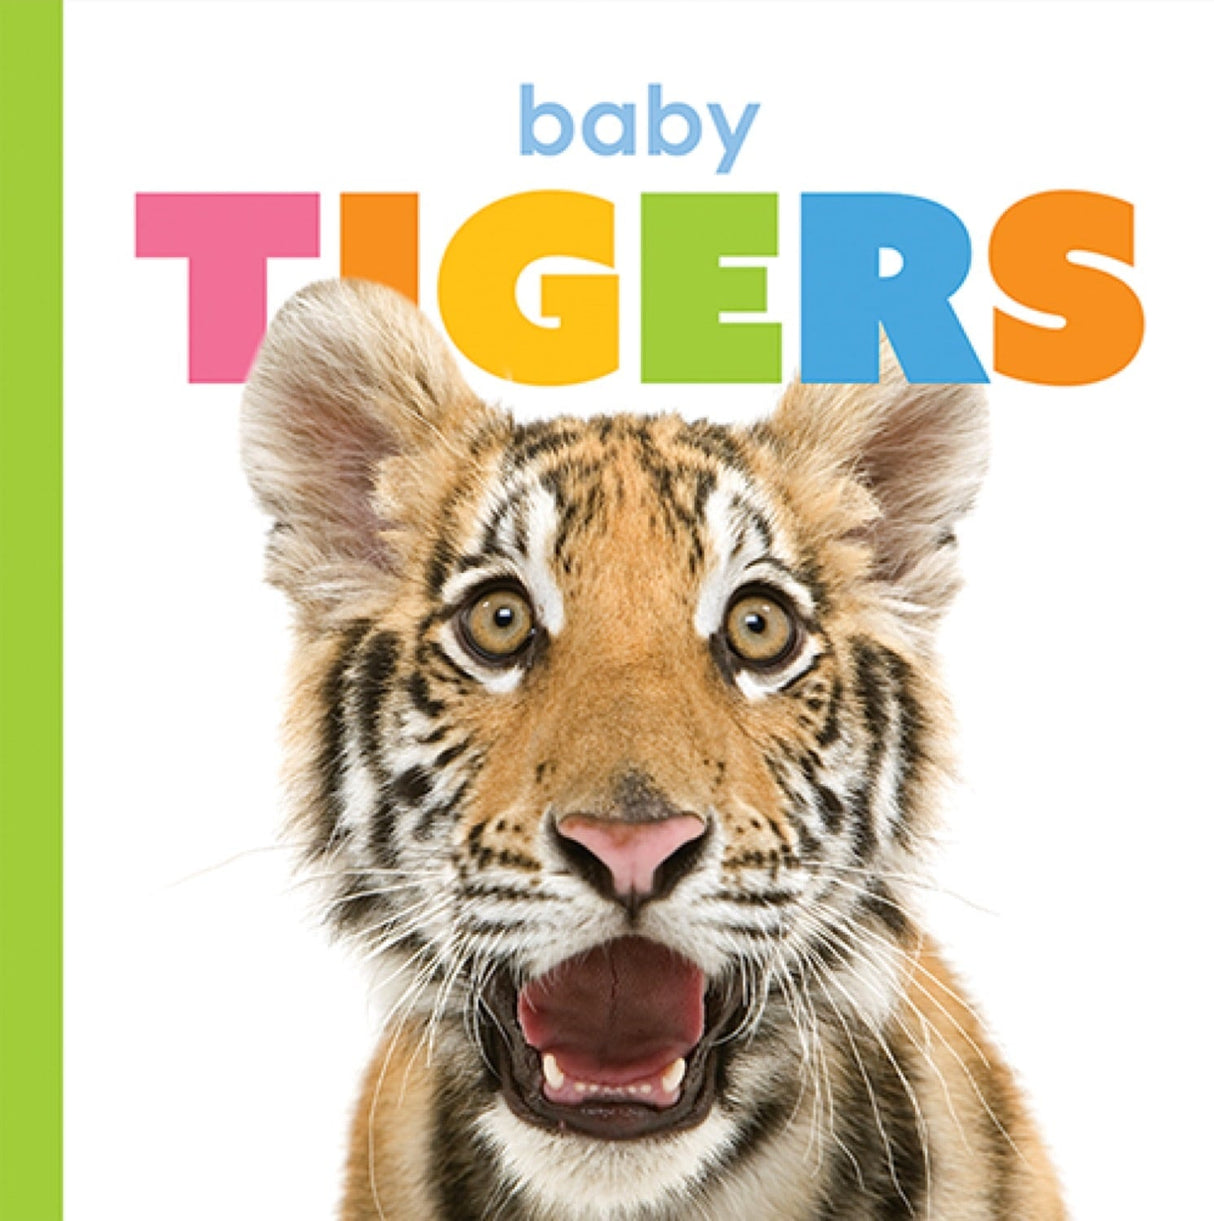 Starting Out: Baby Tigers by The Creative Company Shop